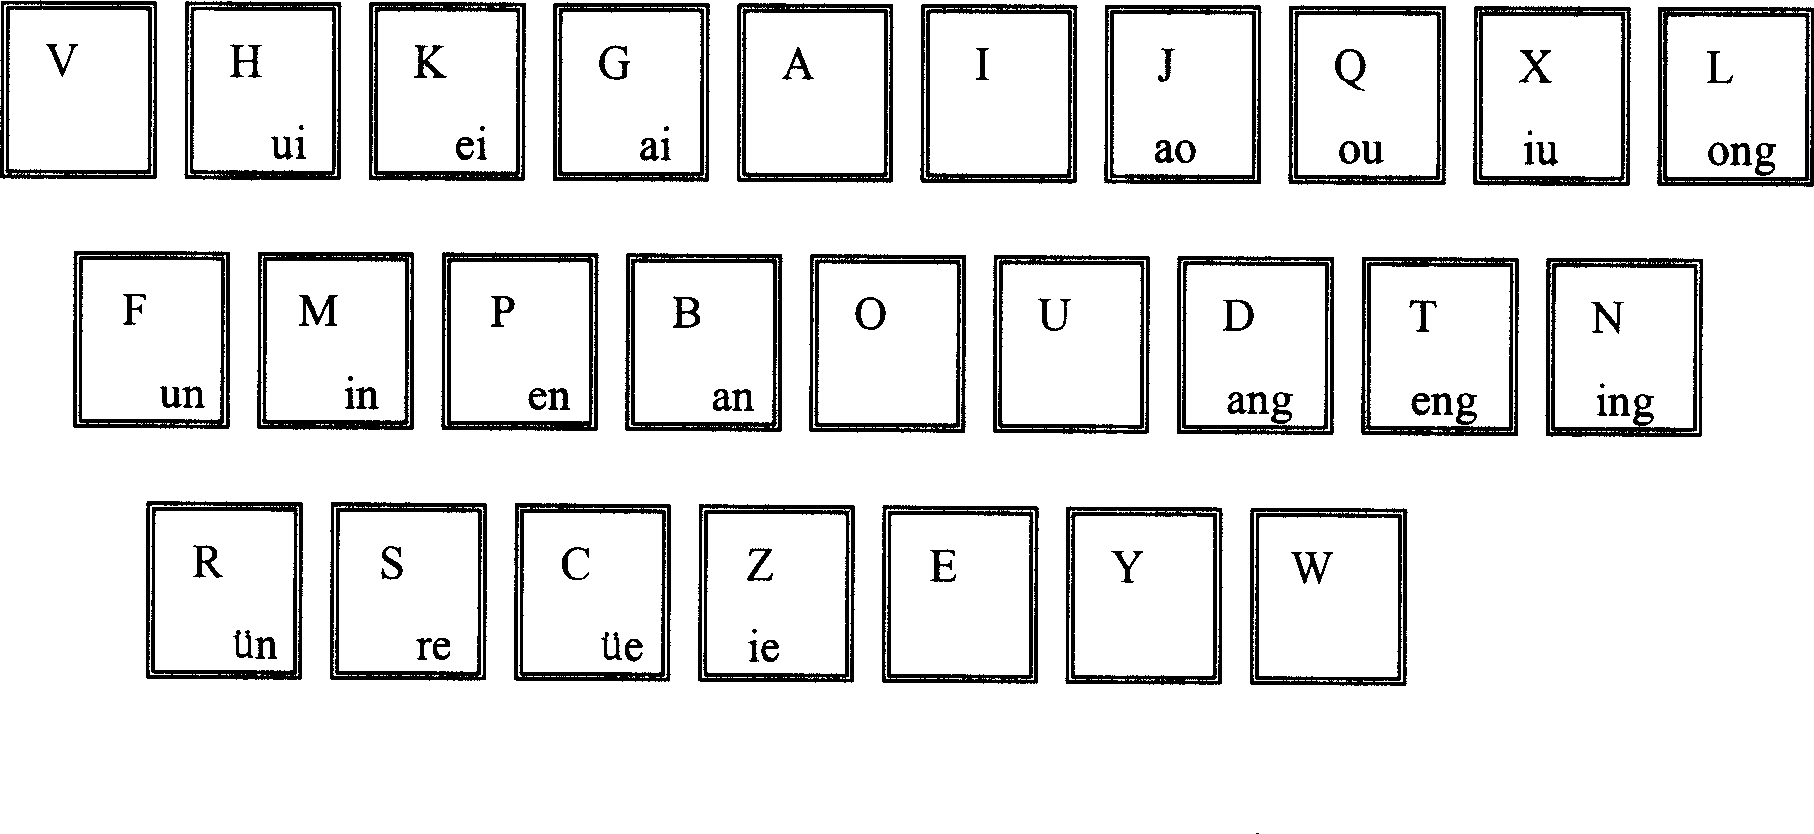 Three-spelling input method and its keyboard